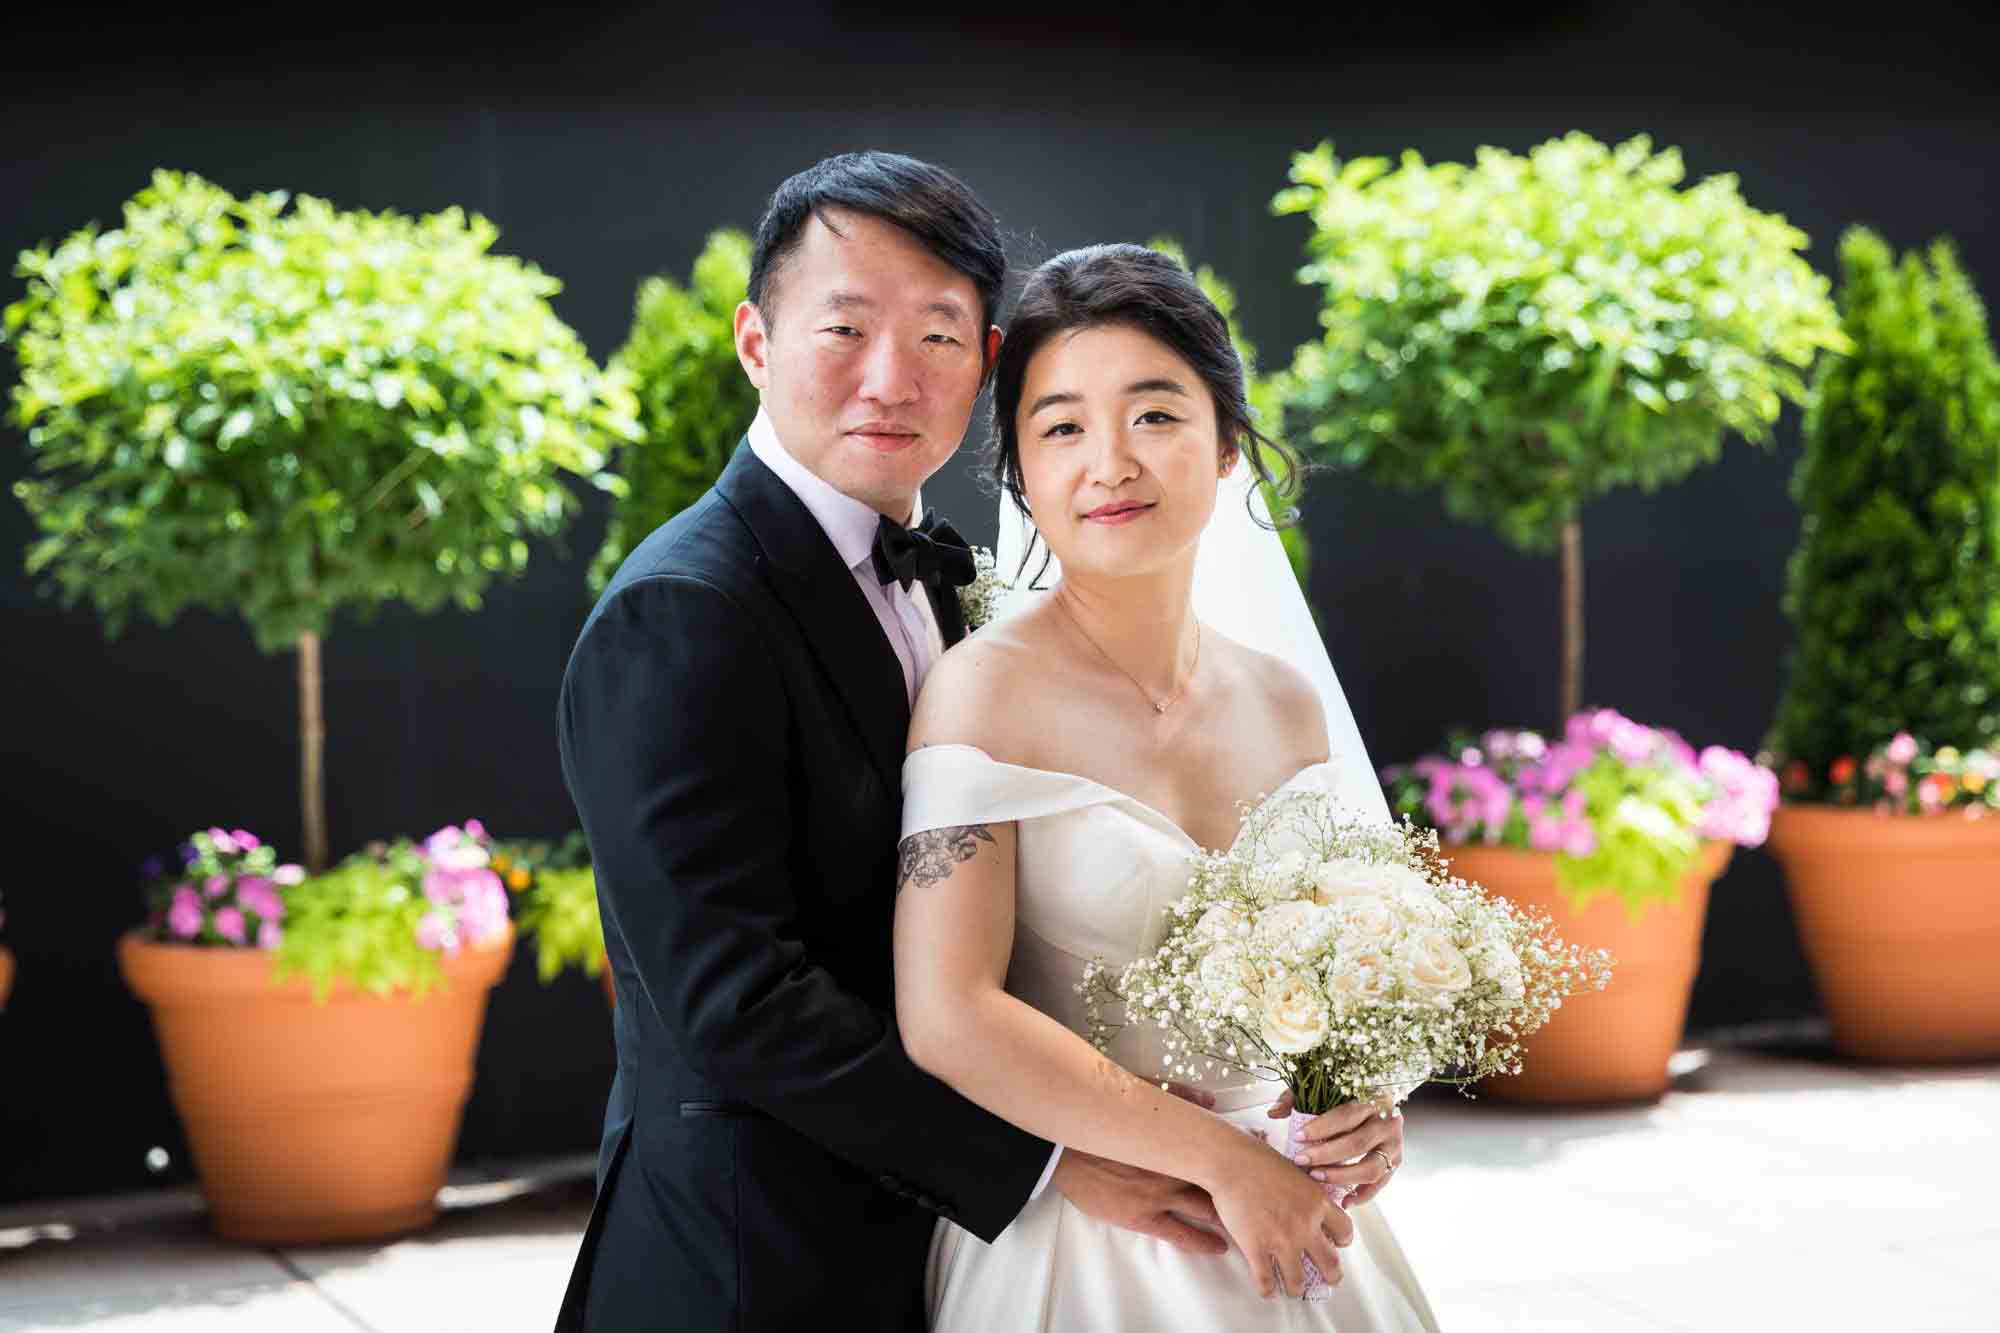 Bride and groom posed in front of potted bushes at a Sheraton LaGuardia East Hotel wedding